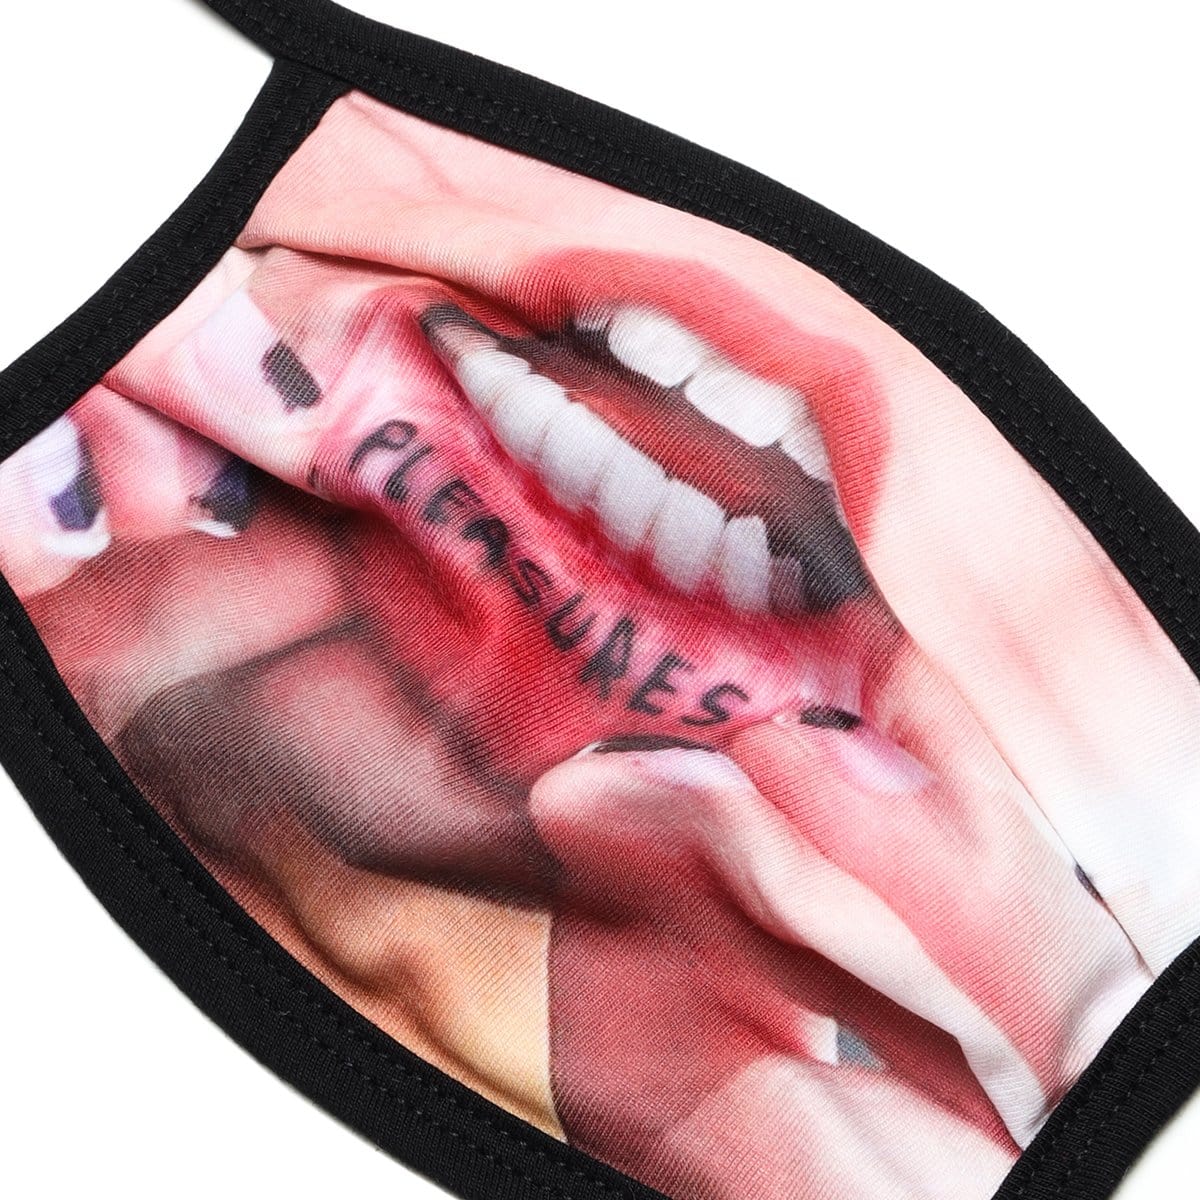 Pleasures Bags & Accessories TATTOO FACE MASK